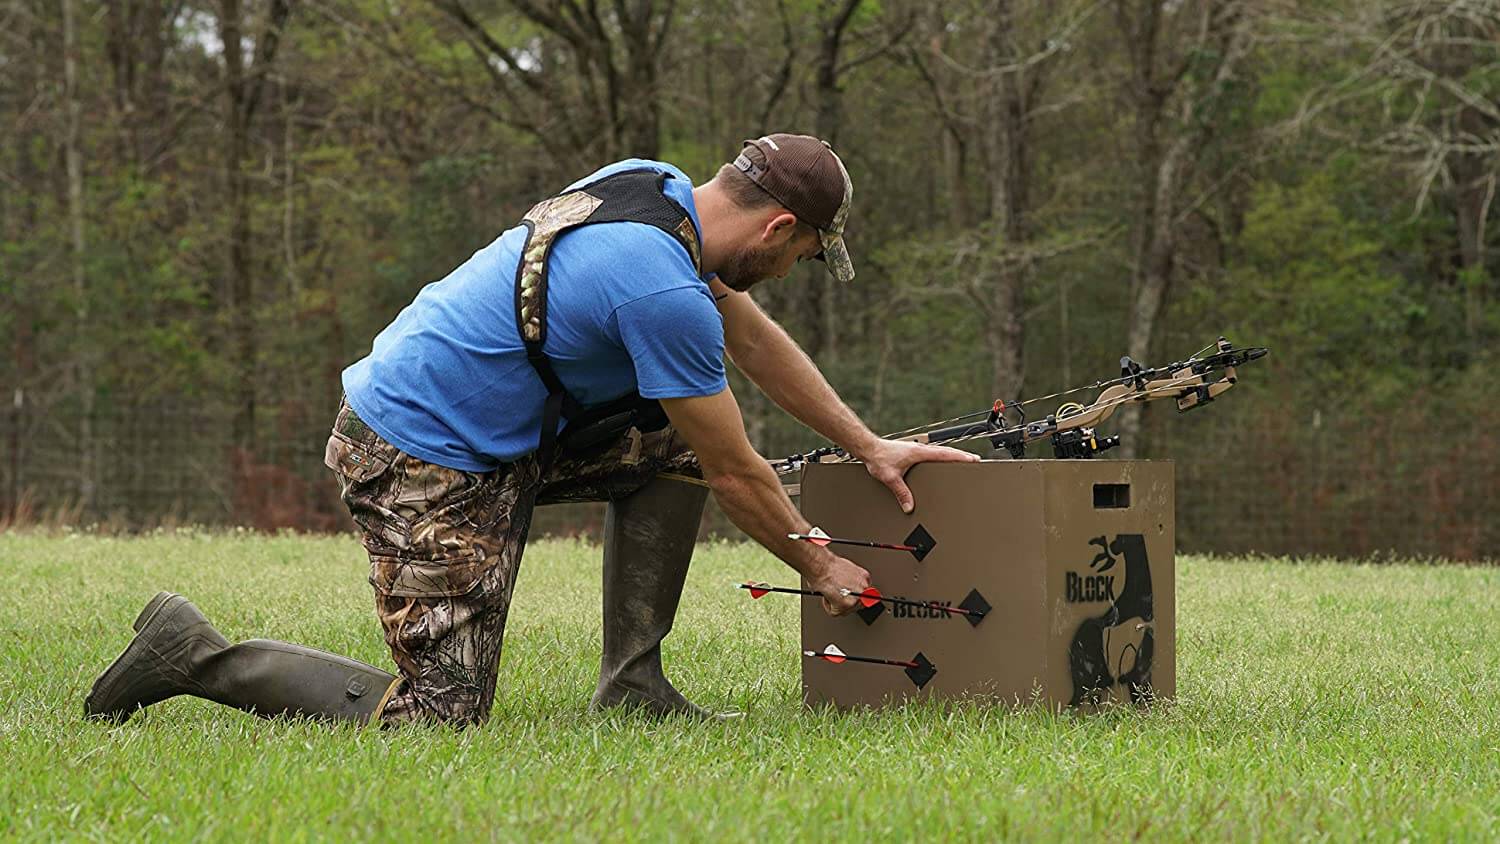 6-Sided Arrow Archery Target with Polyfusion Technology